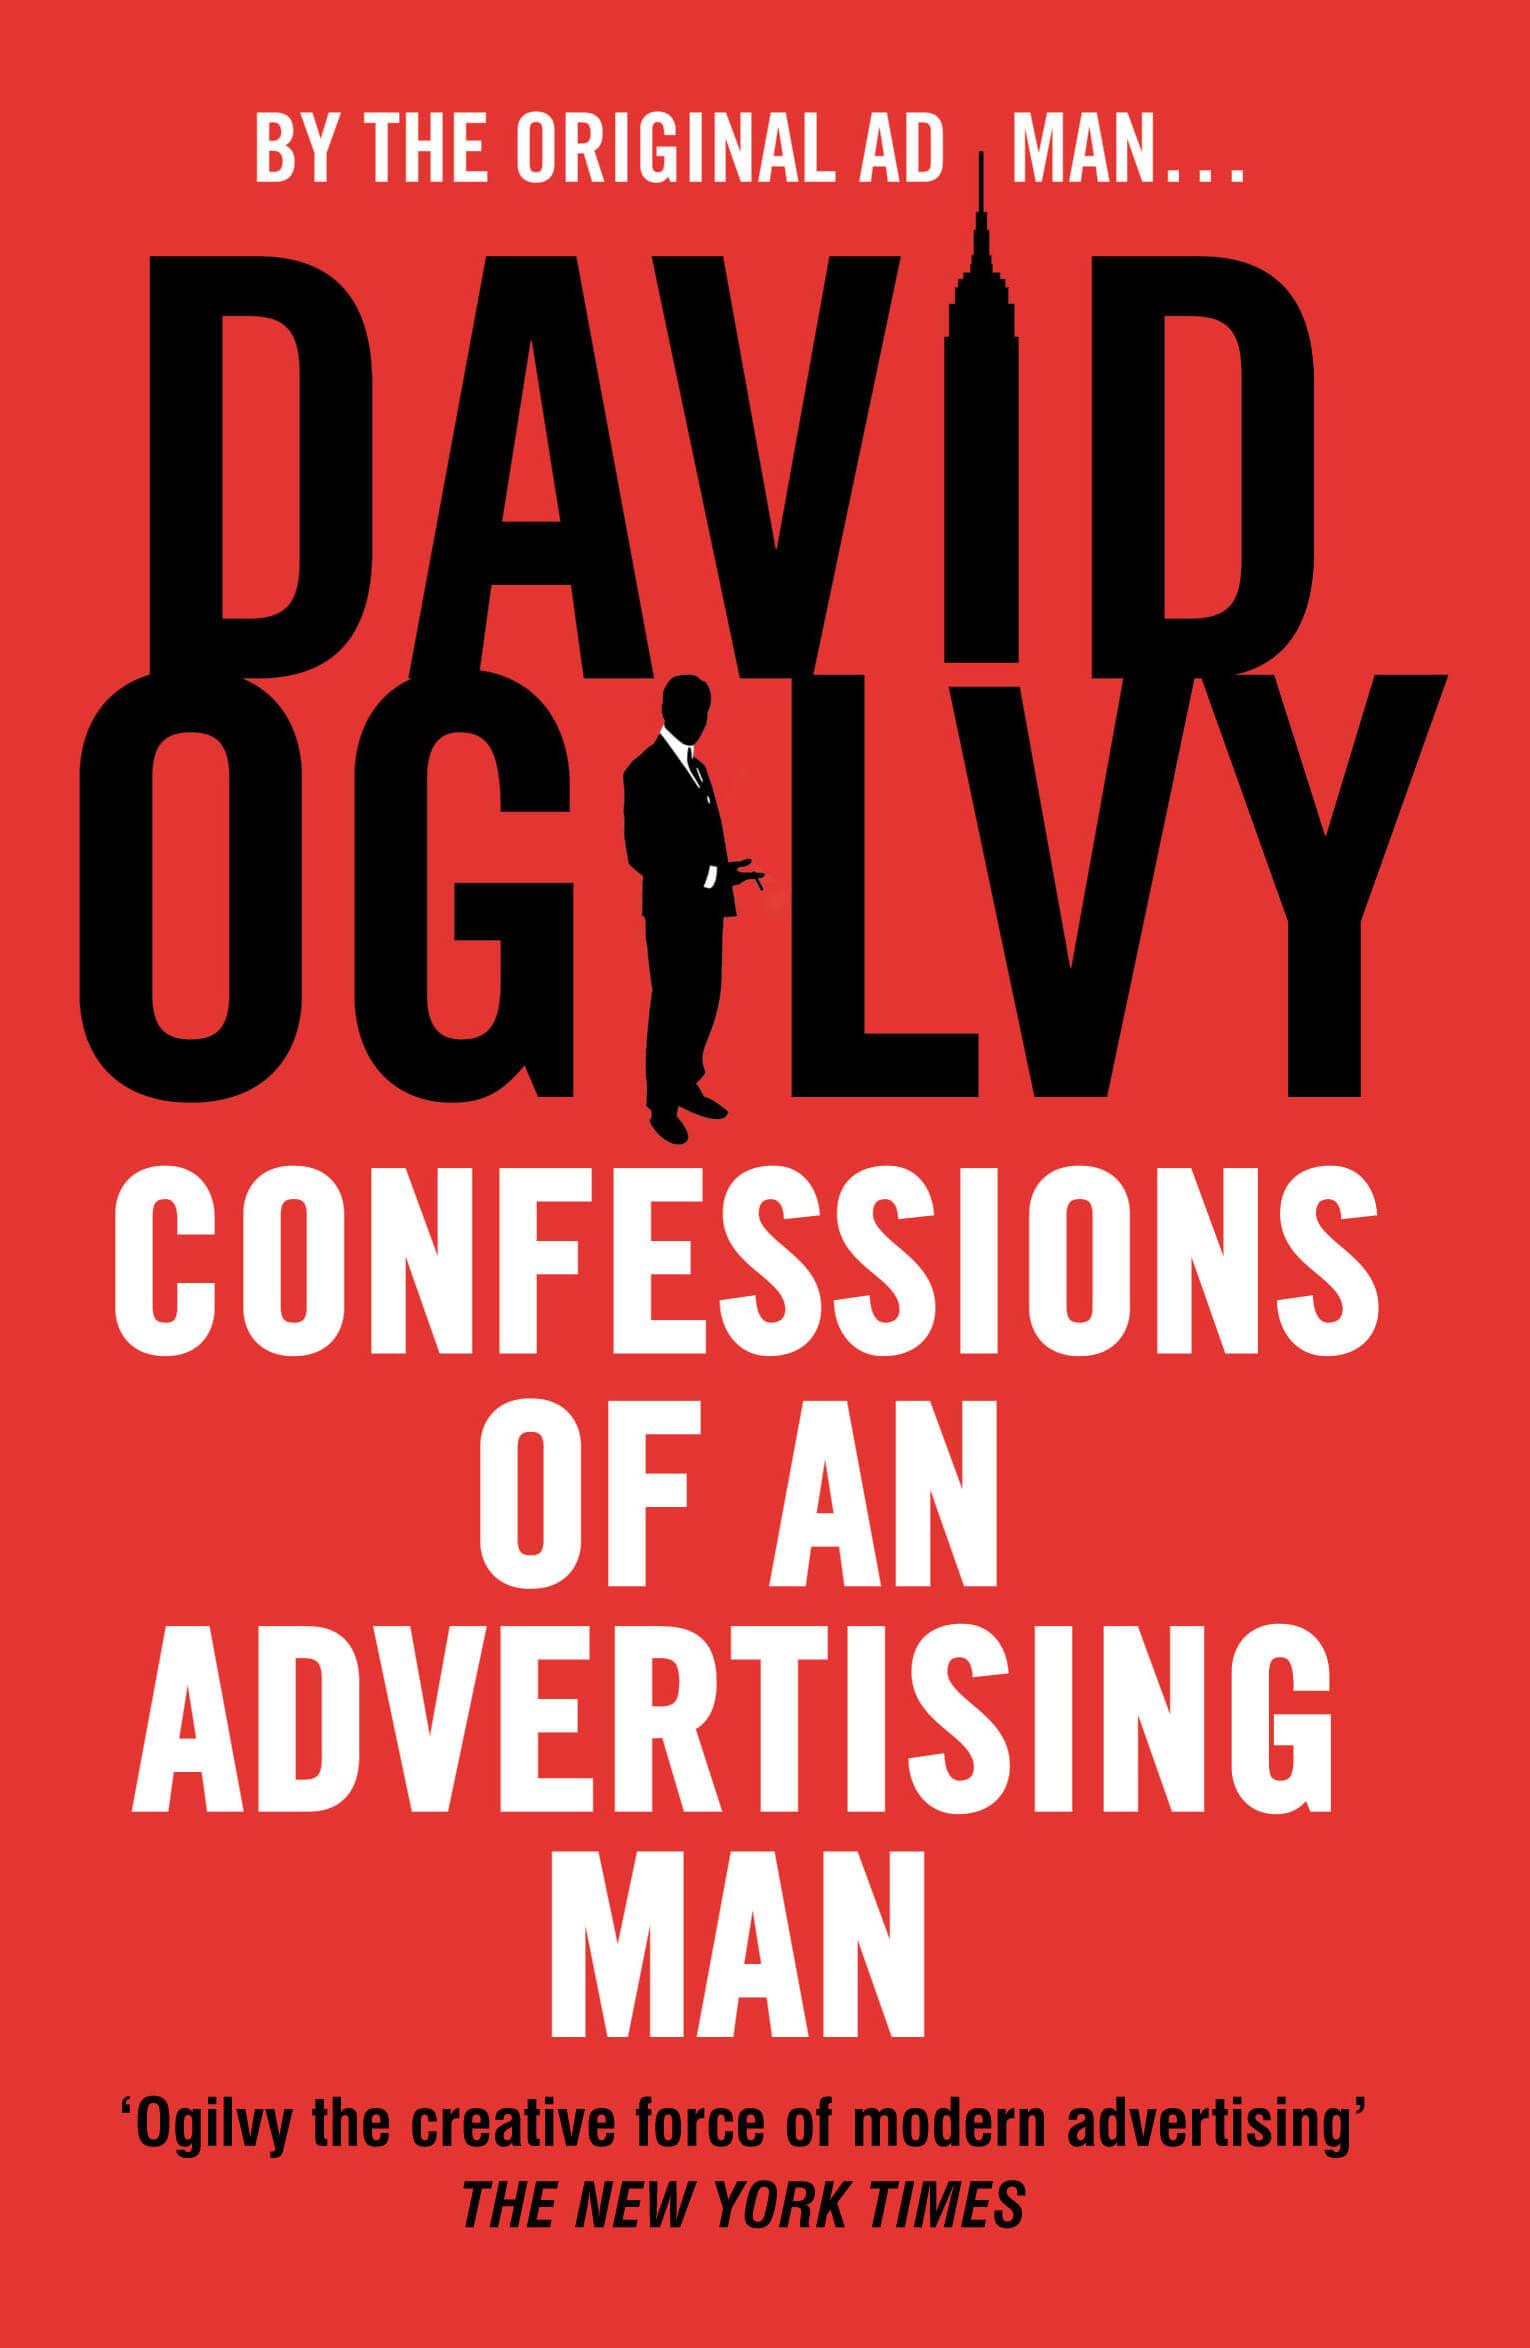 Book cover of David Oglivy's "Confessions Of An Advertising Man"